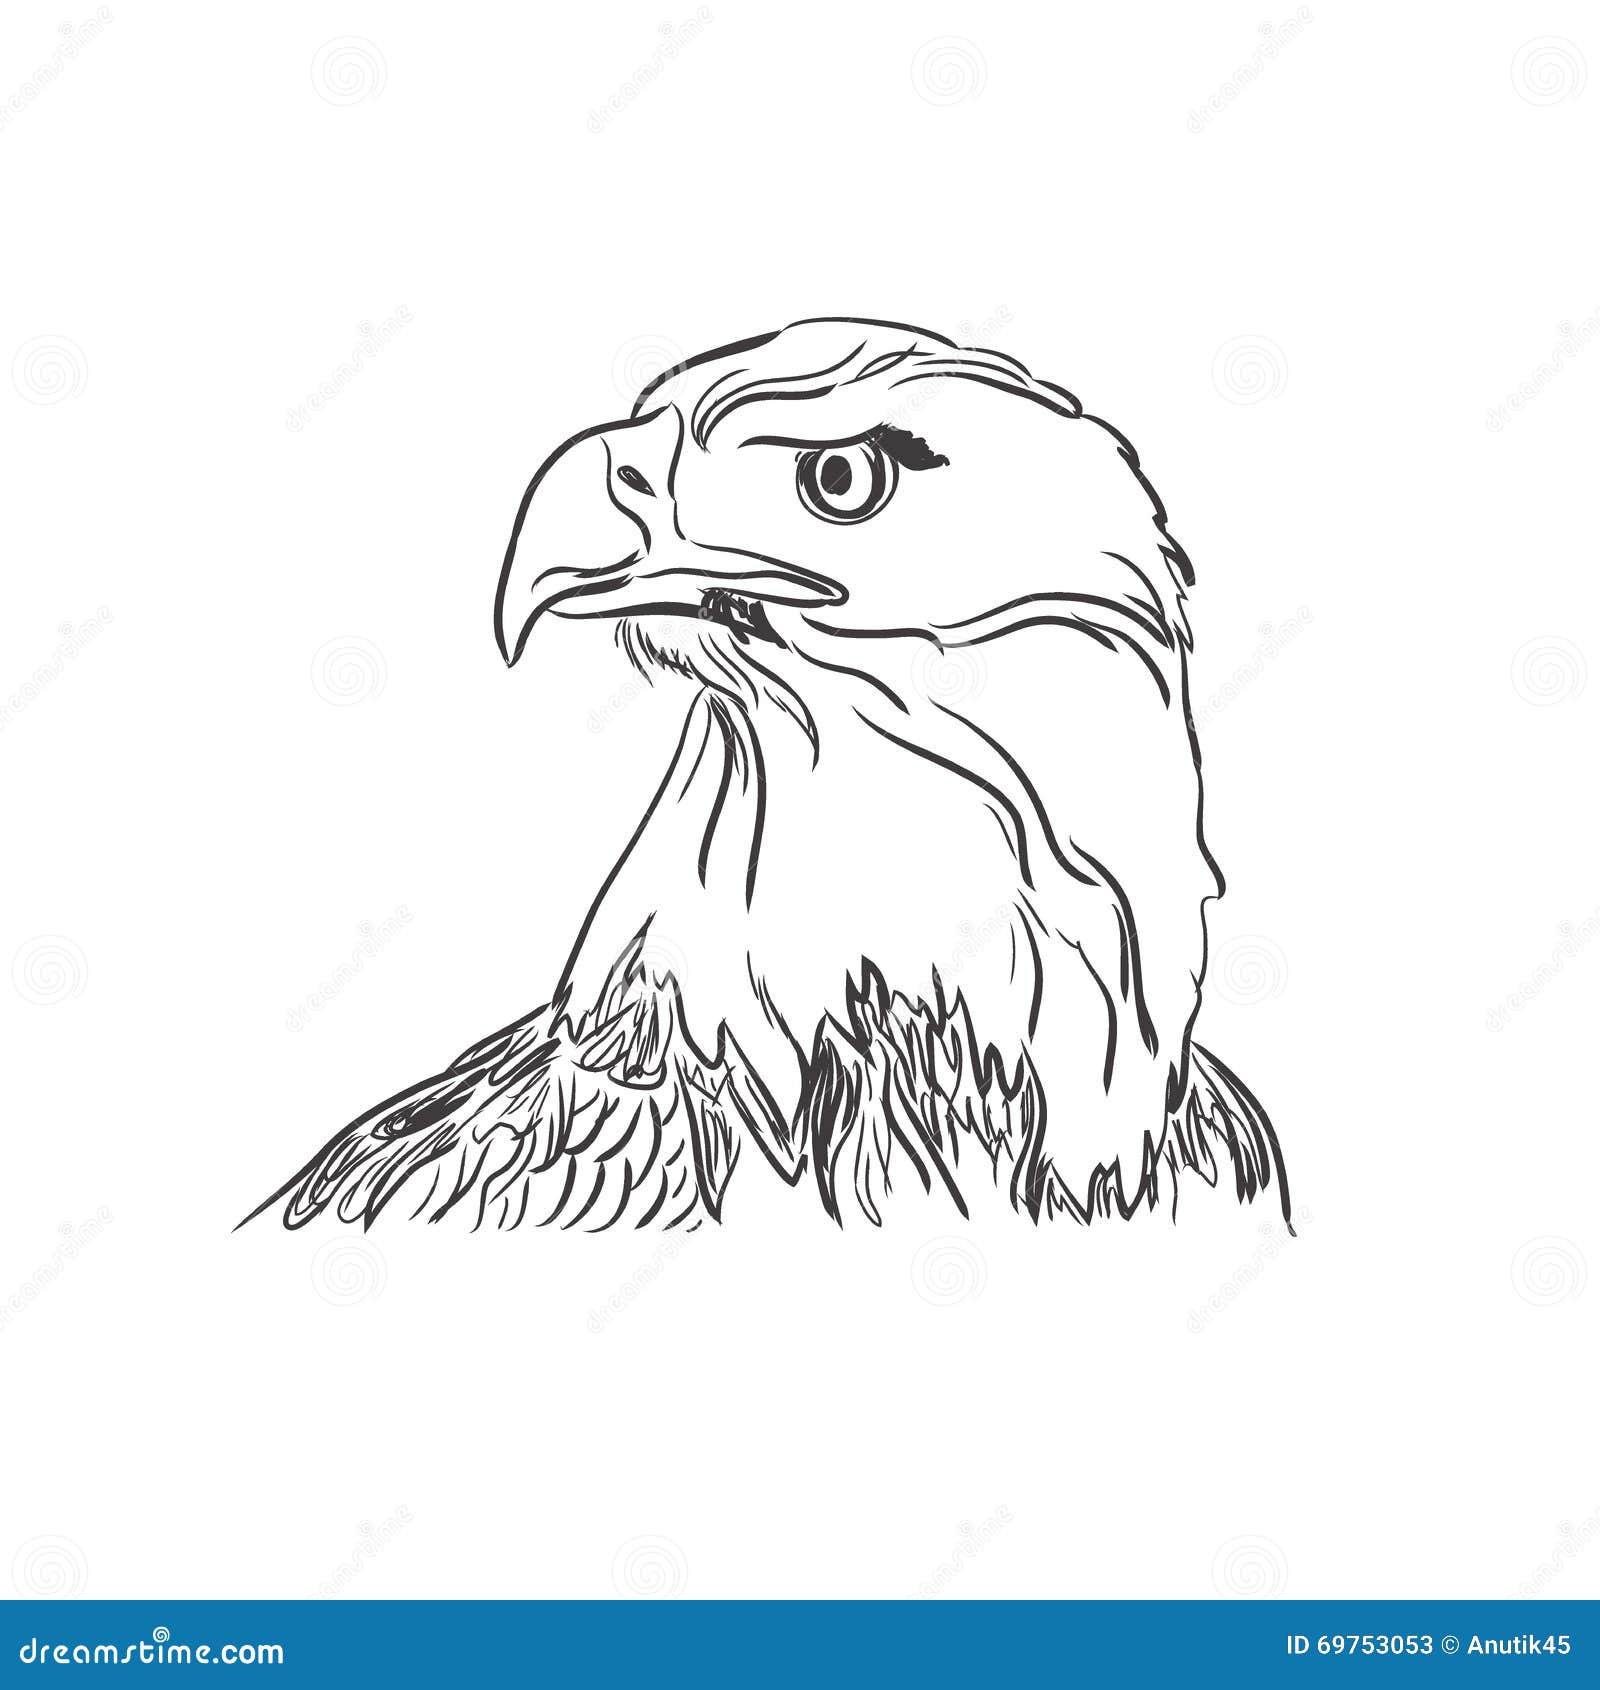 Eagle Drawing With A Black Pen Stock Illustration  Download Image Now   Pencil Drawing Eagle  Bird Animal  iStock